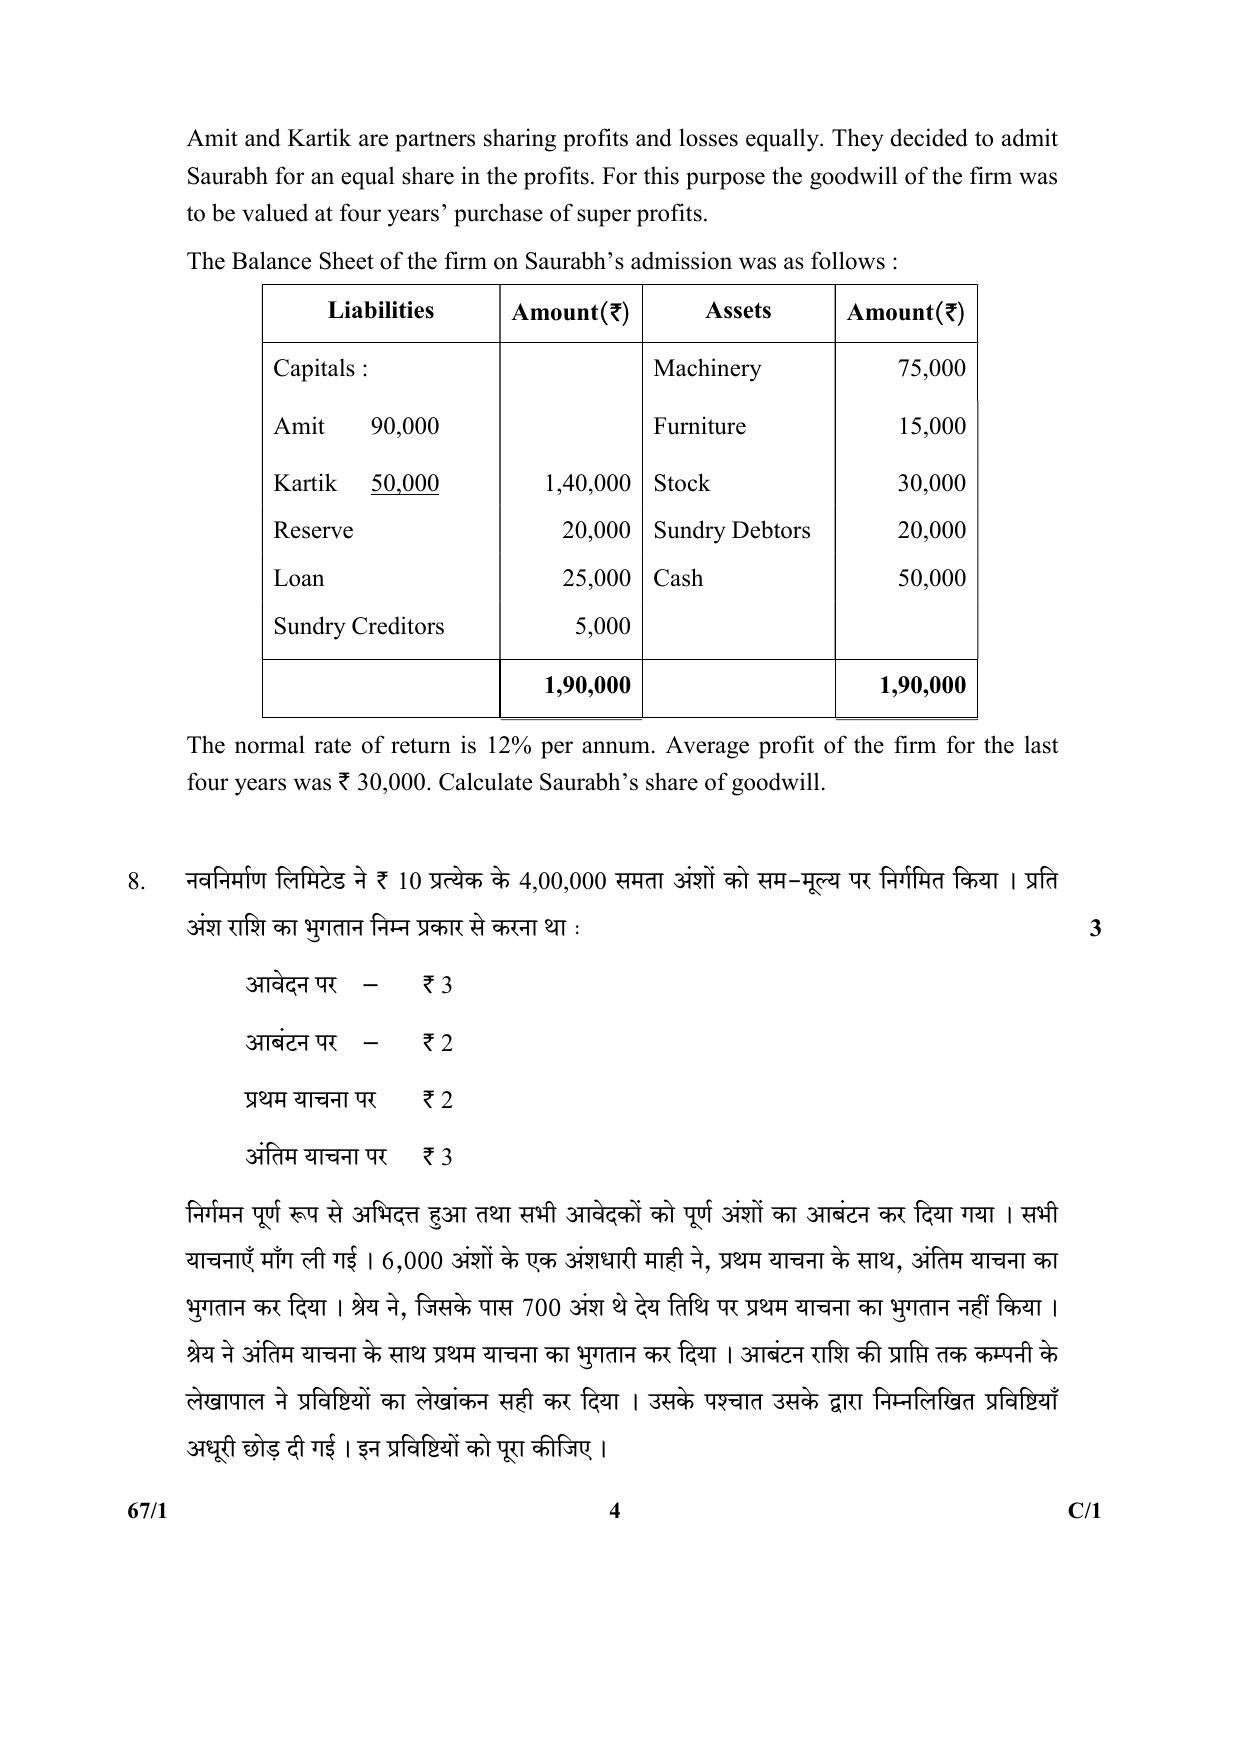 CBSE Class 12 67-1  (Accountancy) 2018 Compartment Question Paper - Page 4